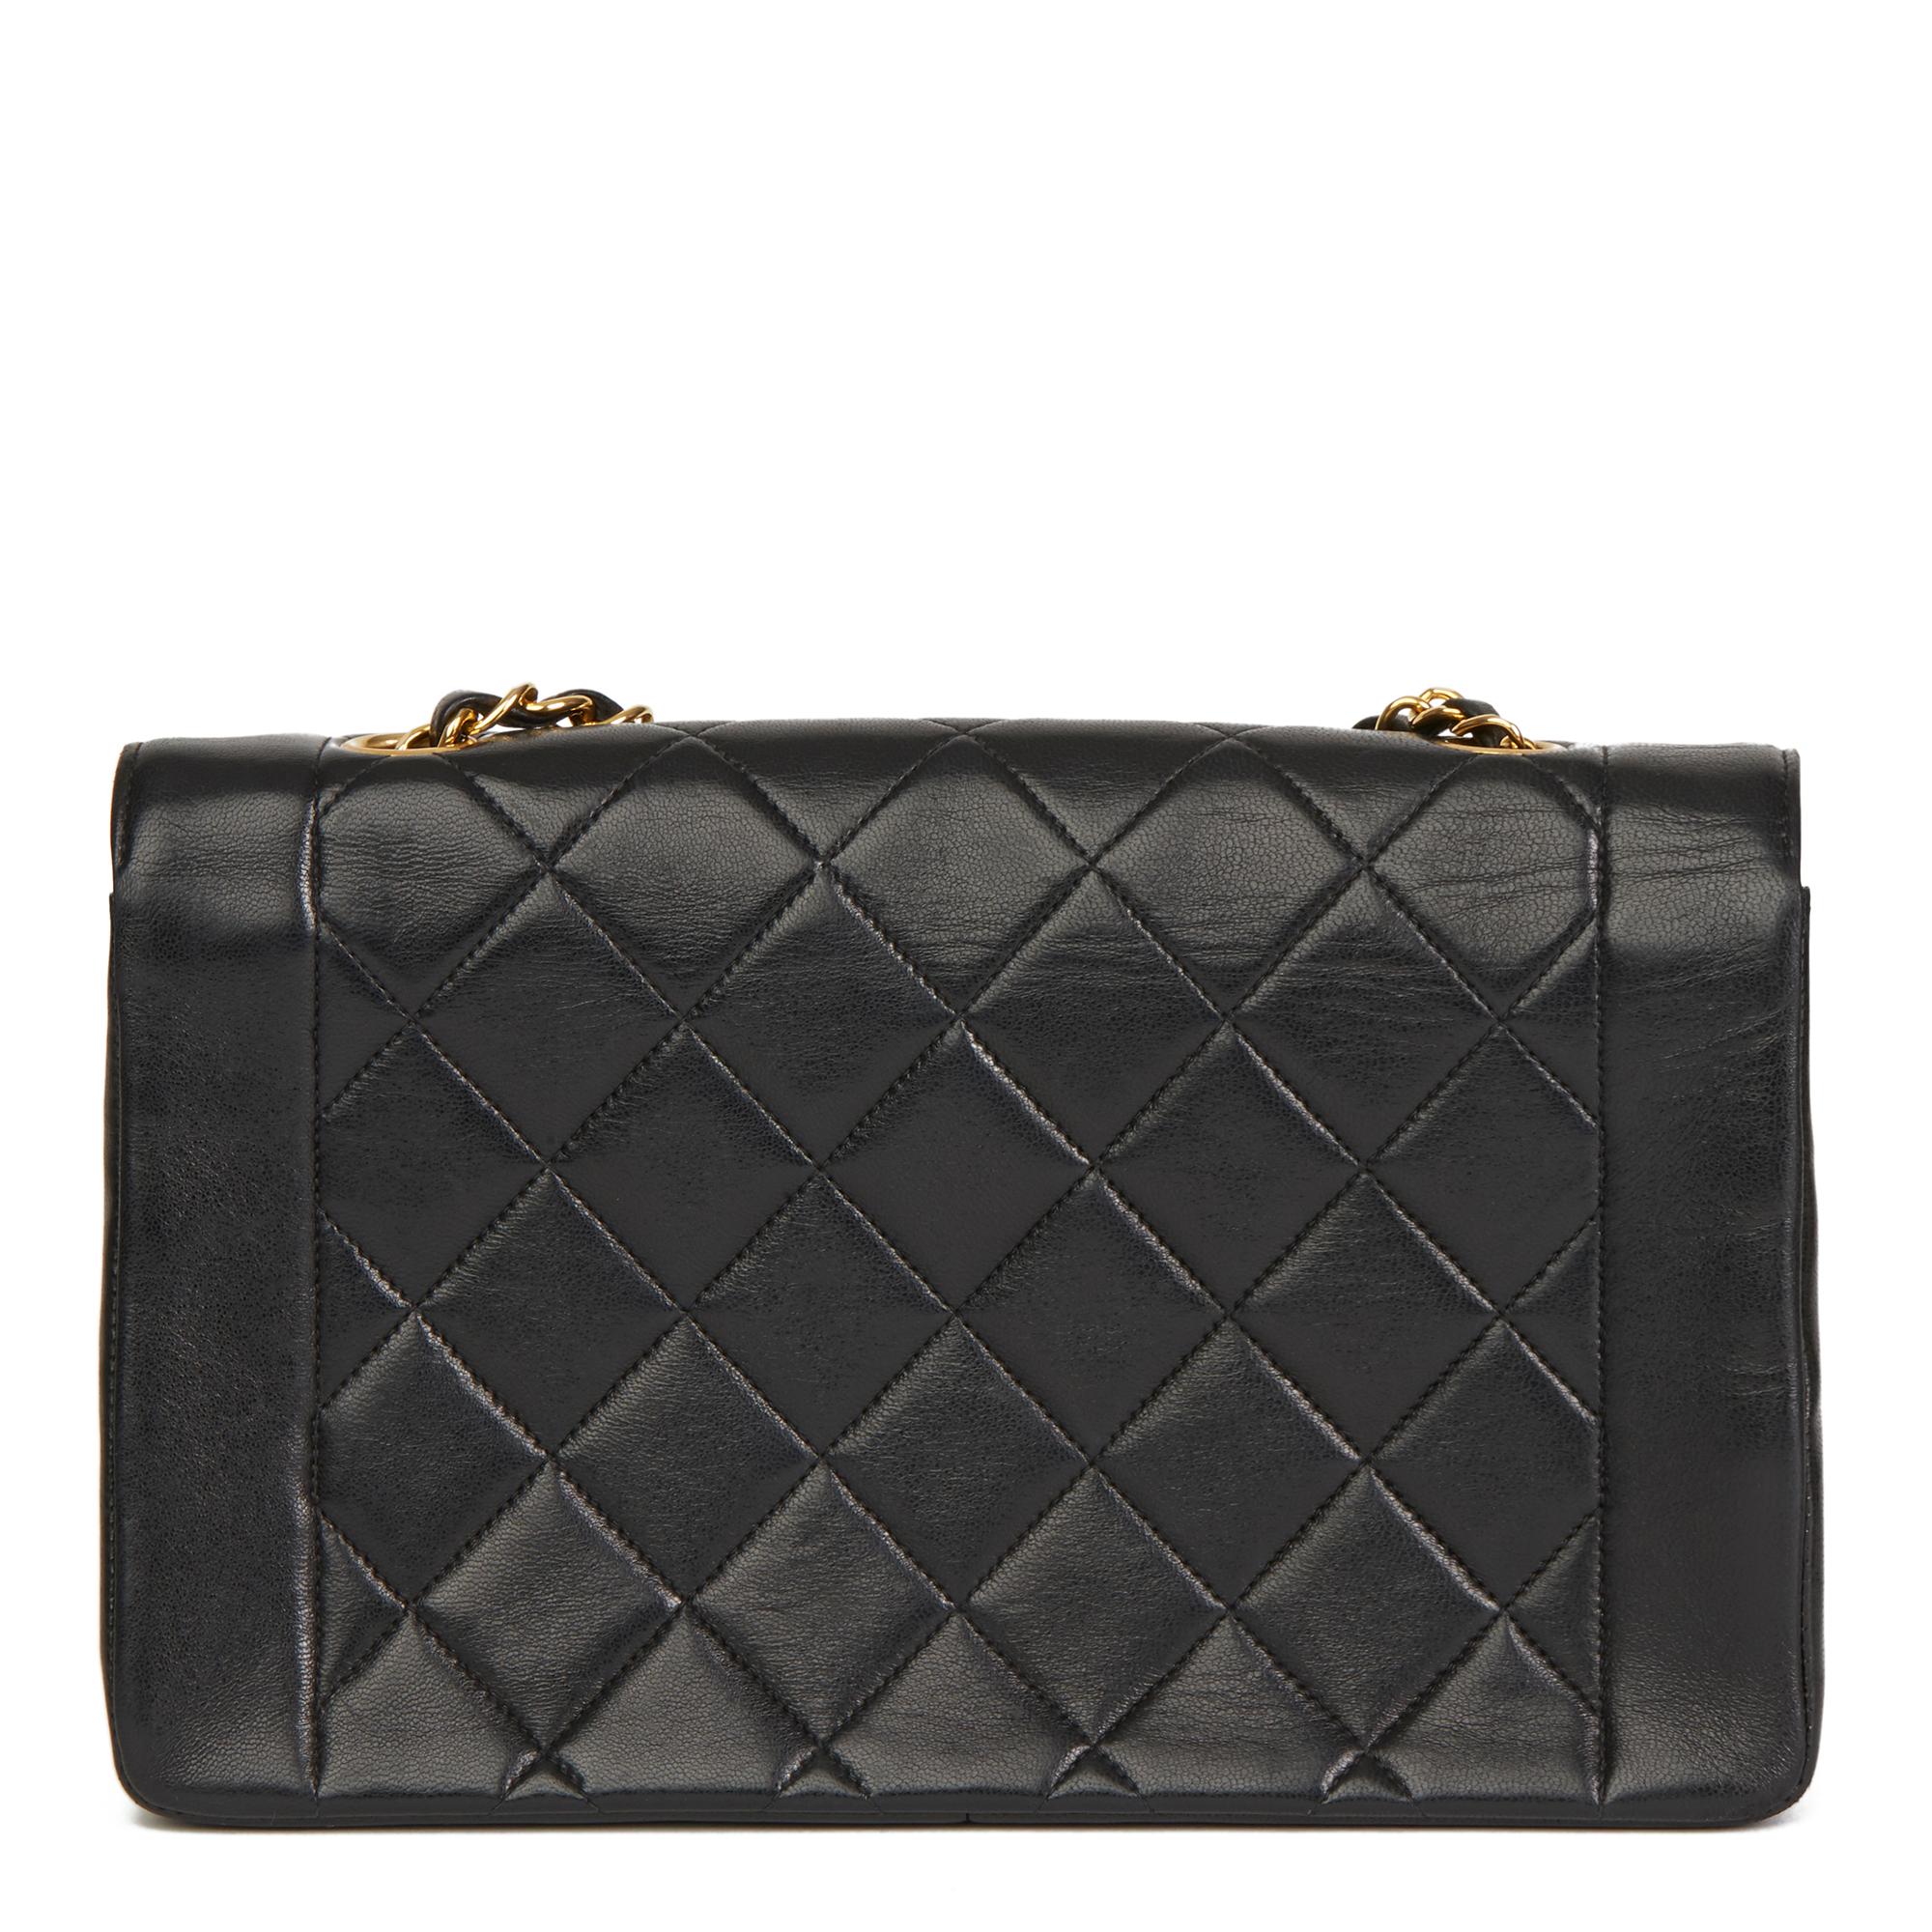 1991 Chanel Black Quilted Lambskin Vintage Medium Diana Classic Single Flap Bag 7